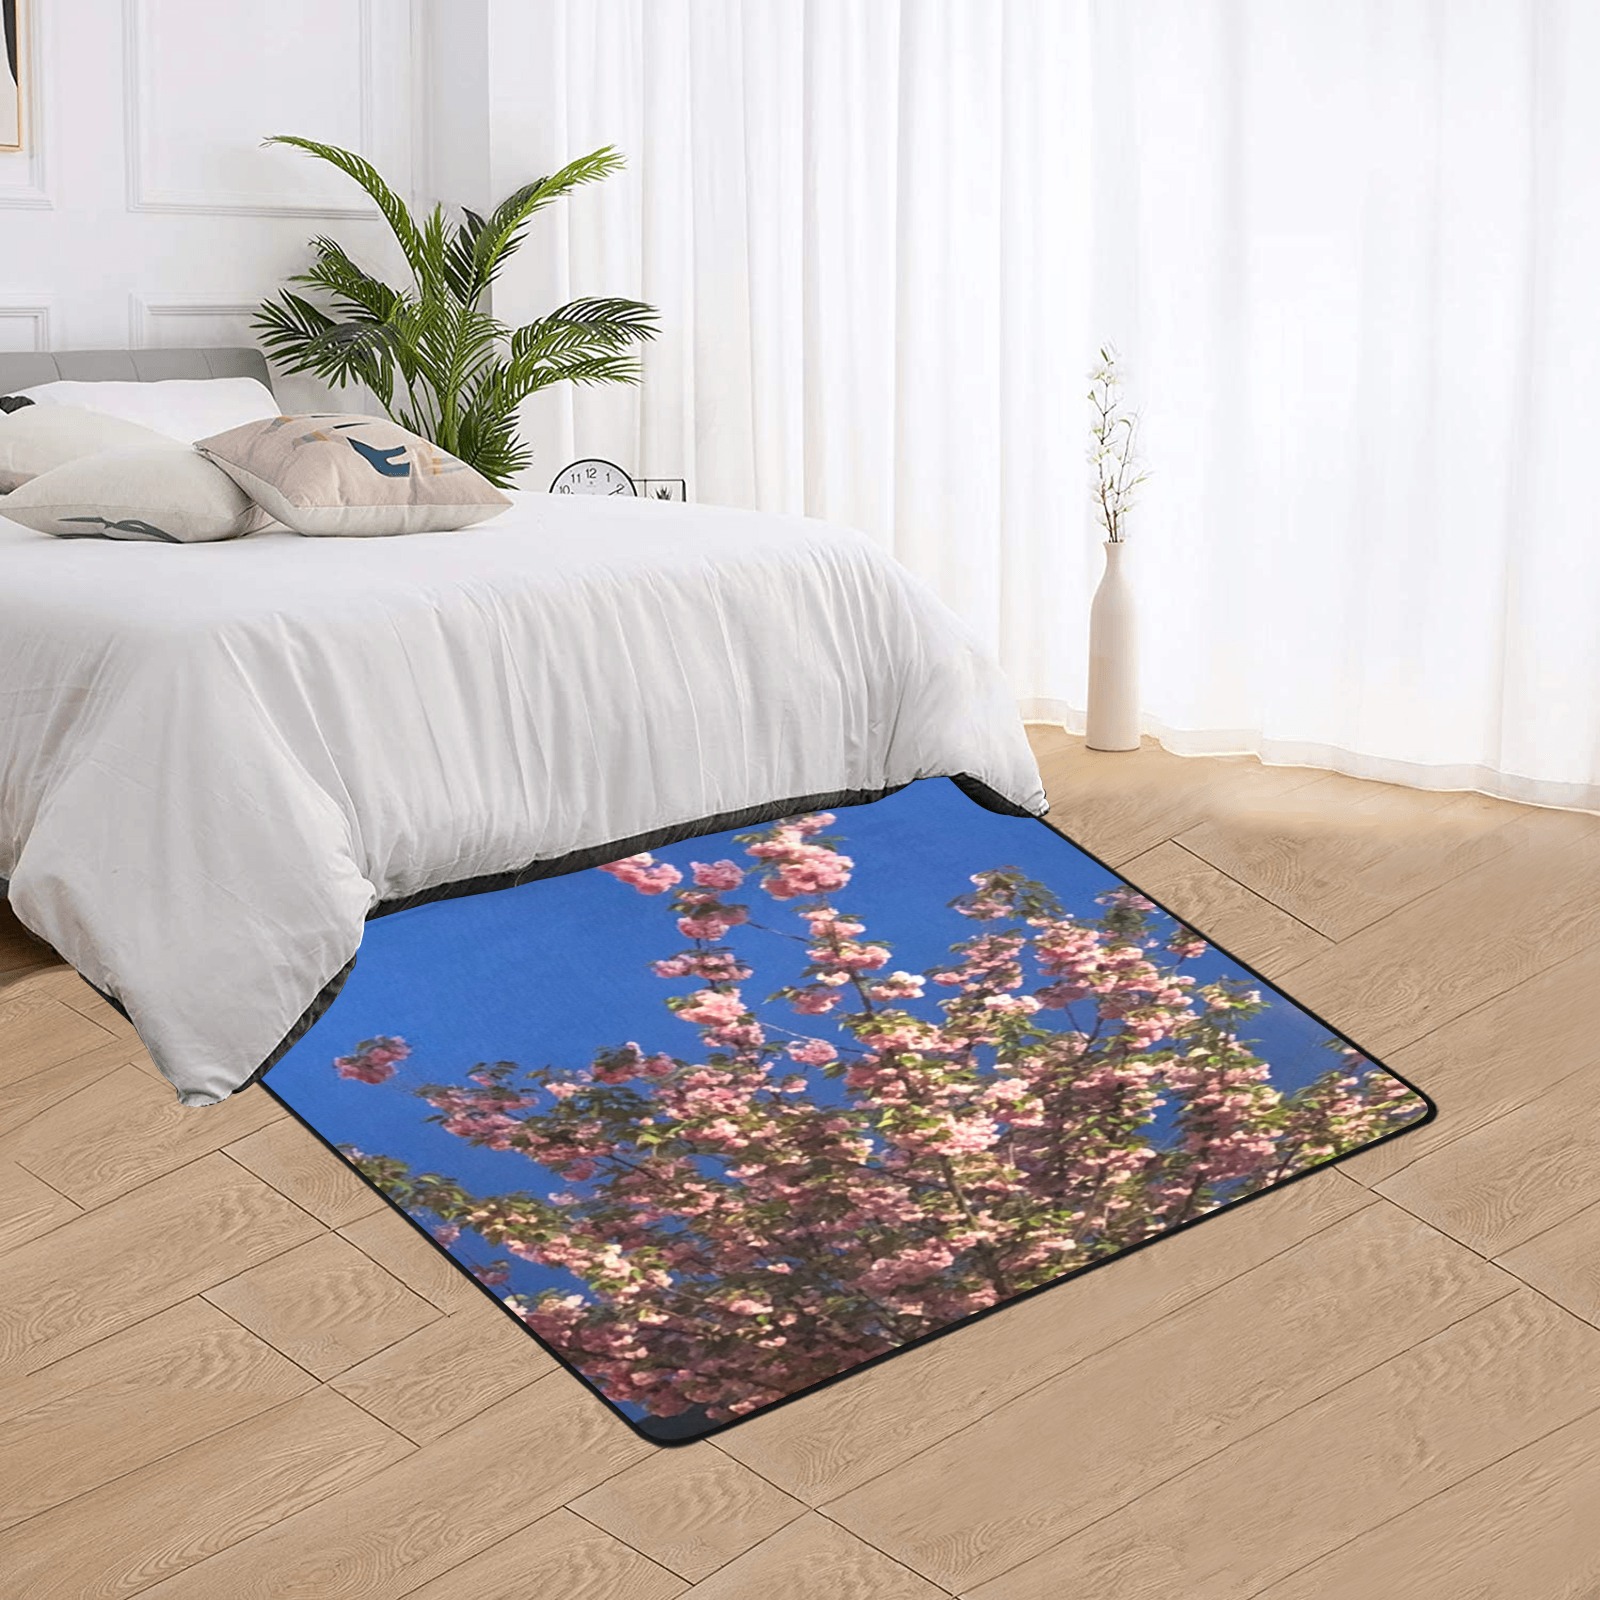 Cherry Tree Collection Area Rug with Black Binding 5'3''x4'